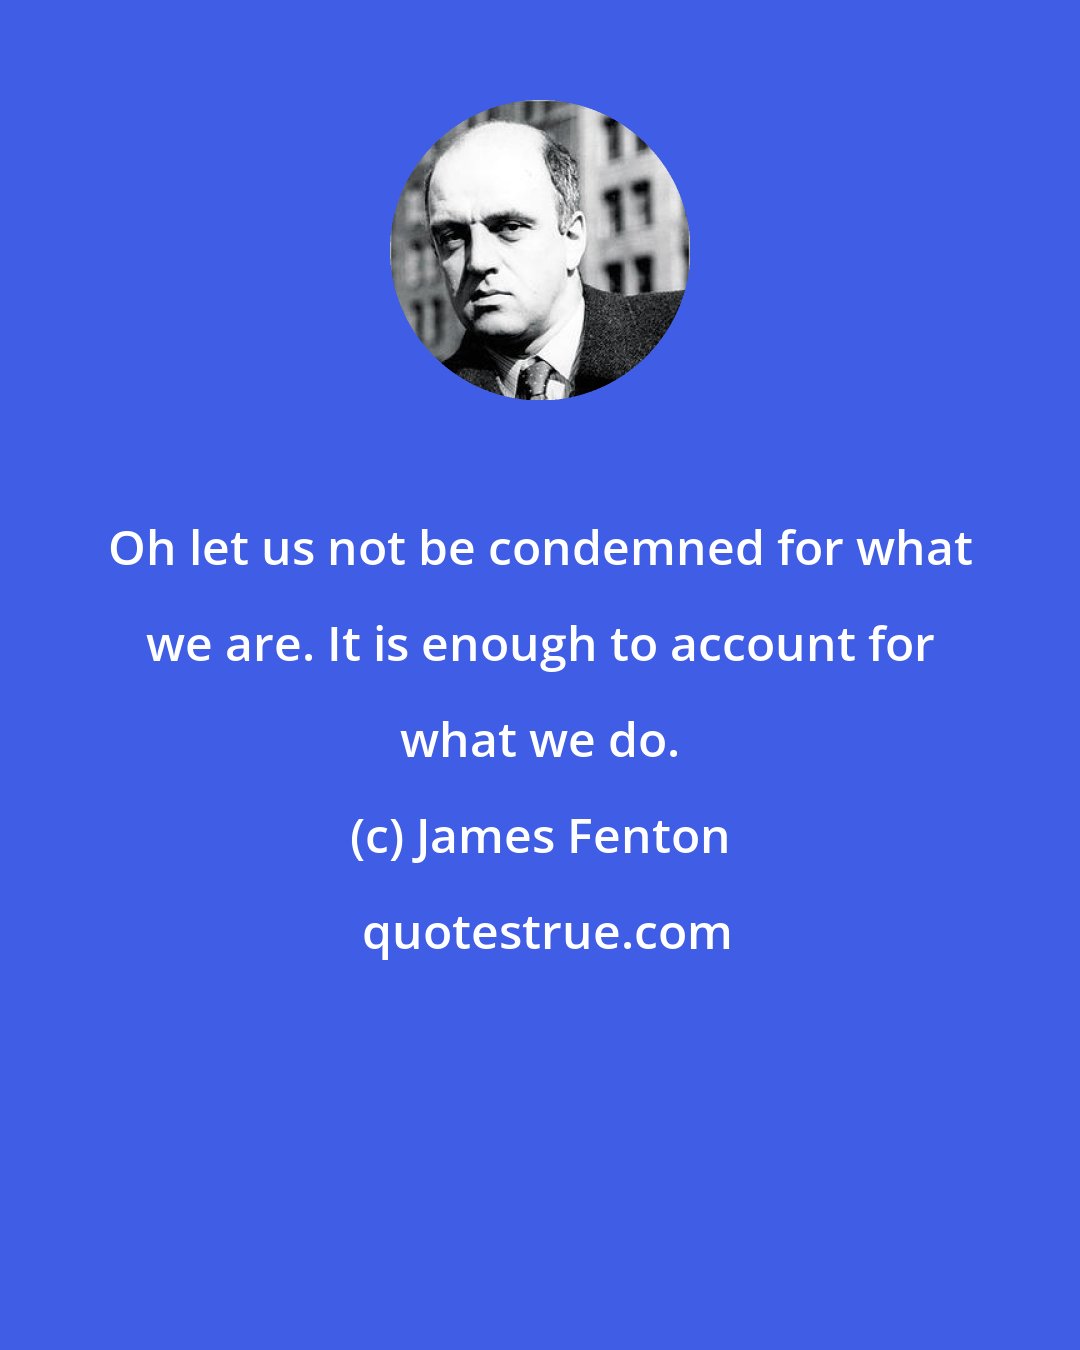 James Fenton: Oh let us not be condemned for what we are. It is enough to account for what we do.